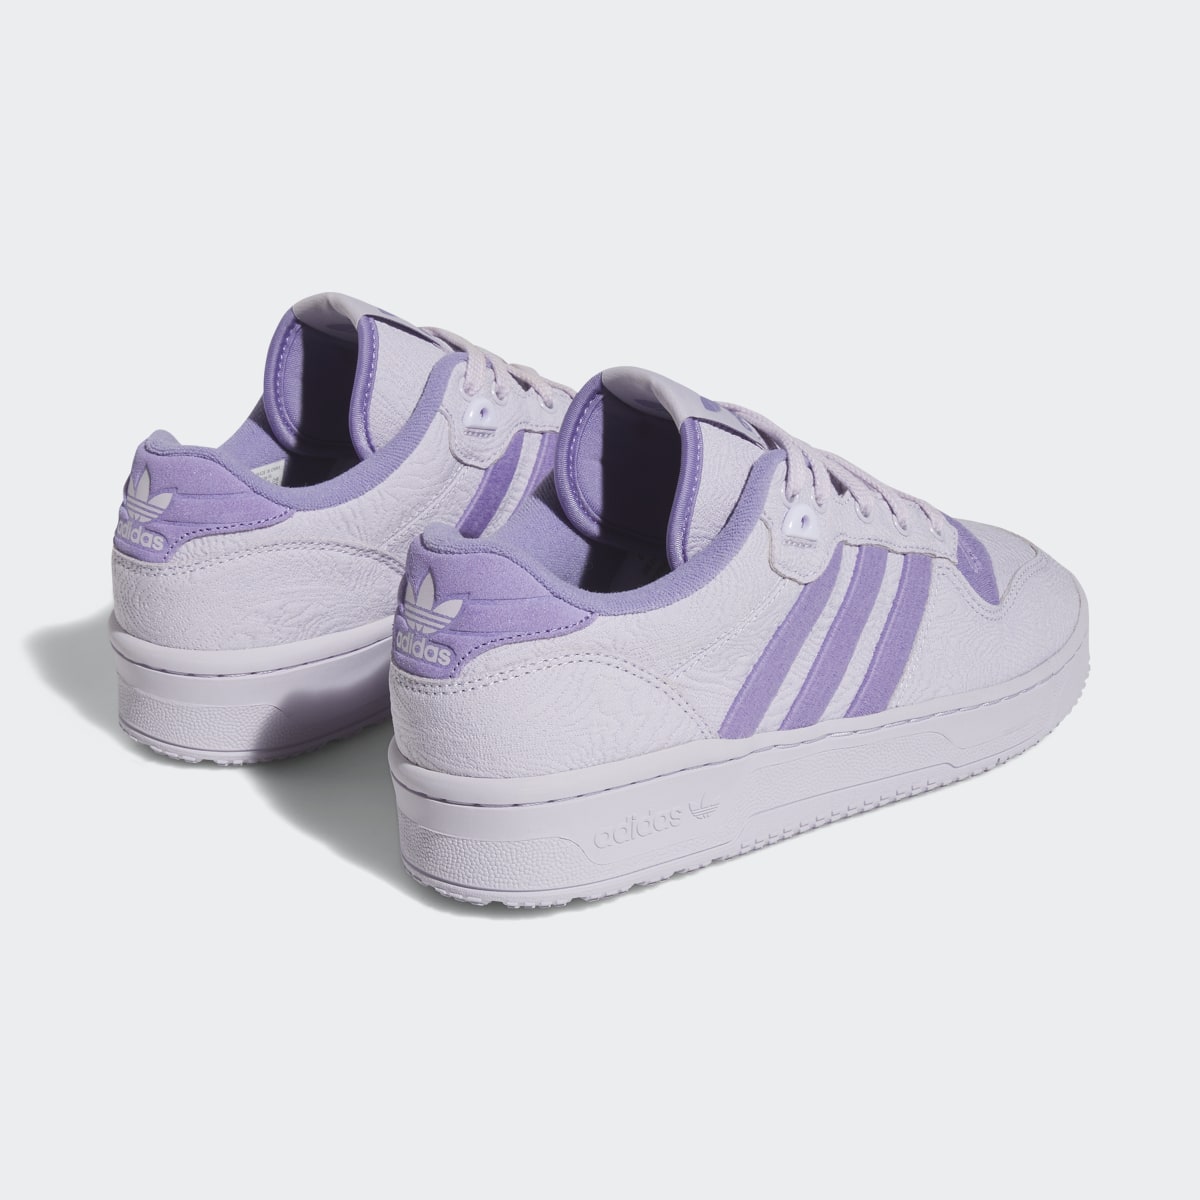 Adidas Rivalry Low TR Shoes. 6